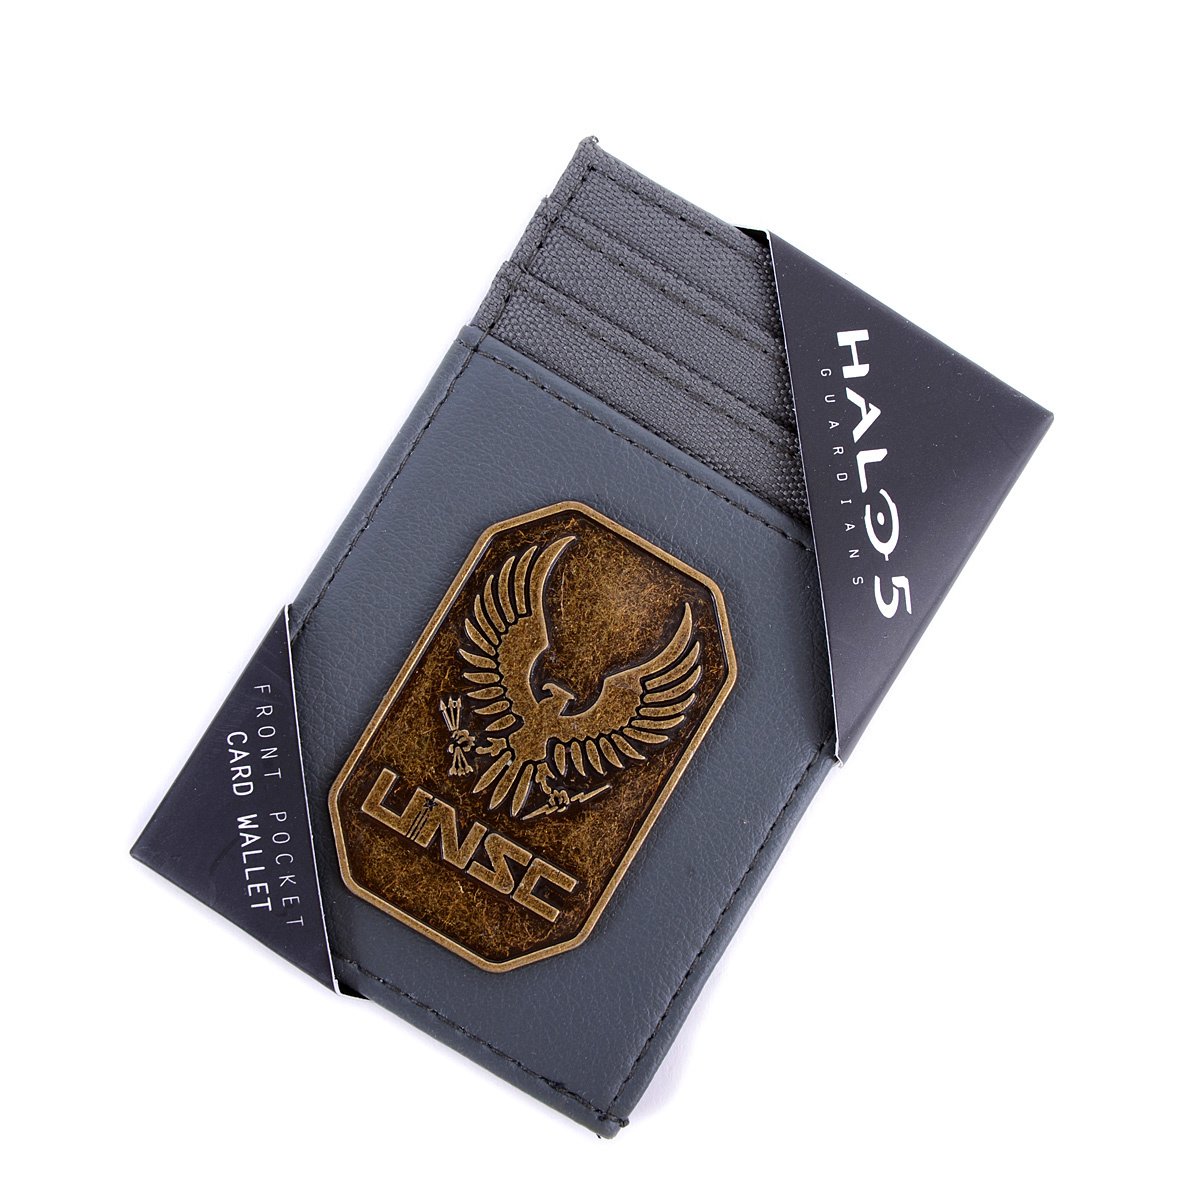 Halo UNSC Brass Badge Frontpocket Wallet GREAT QUALITY 